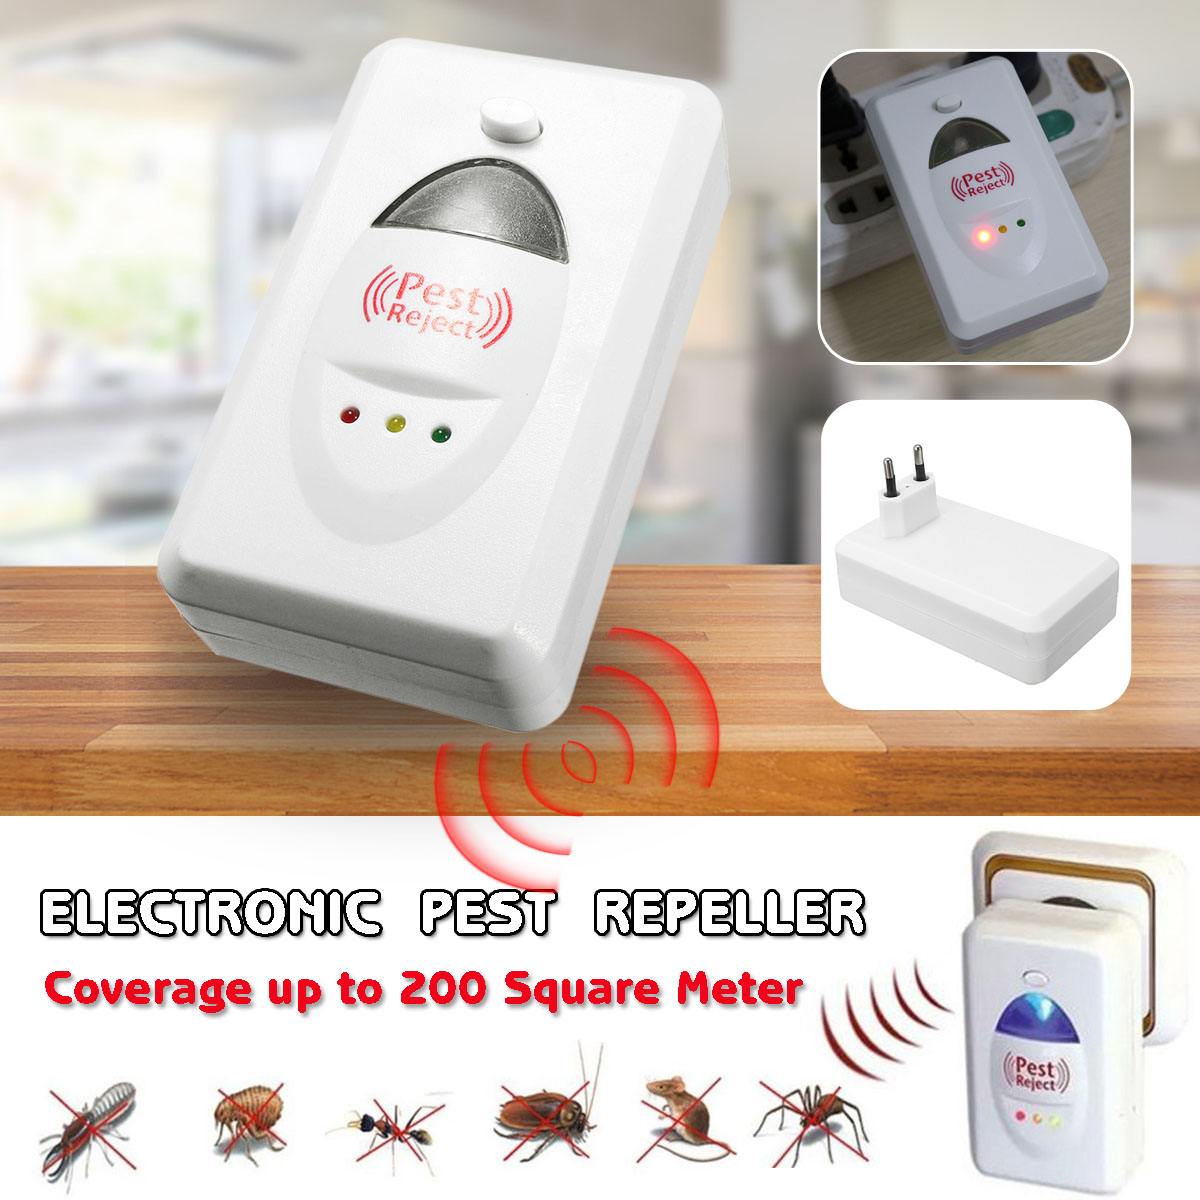 110V-Ultrasonic-Electronic-Pest-Dispeller-Reject-Anti-Mosquito-Bug-Insect-Enhanced-PVC-1612001-3